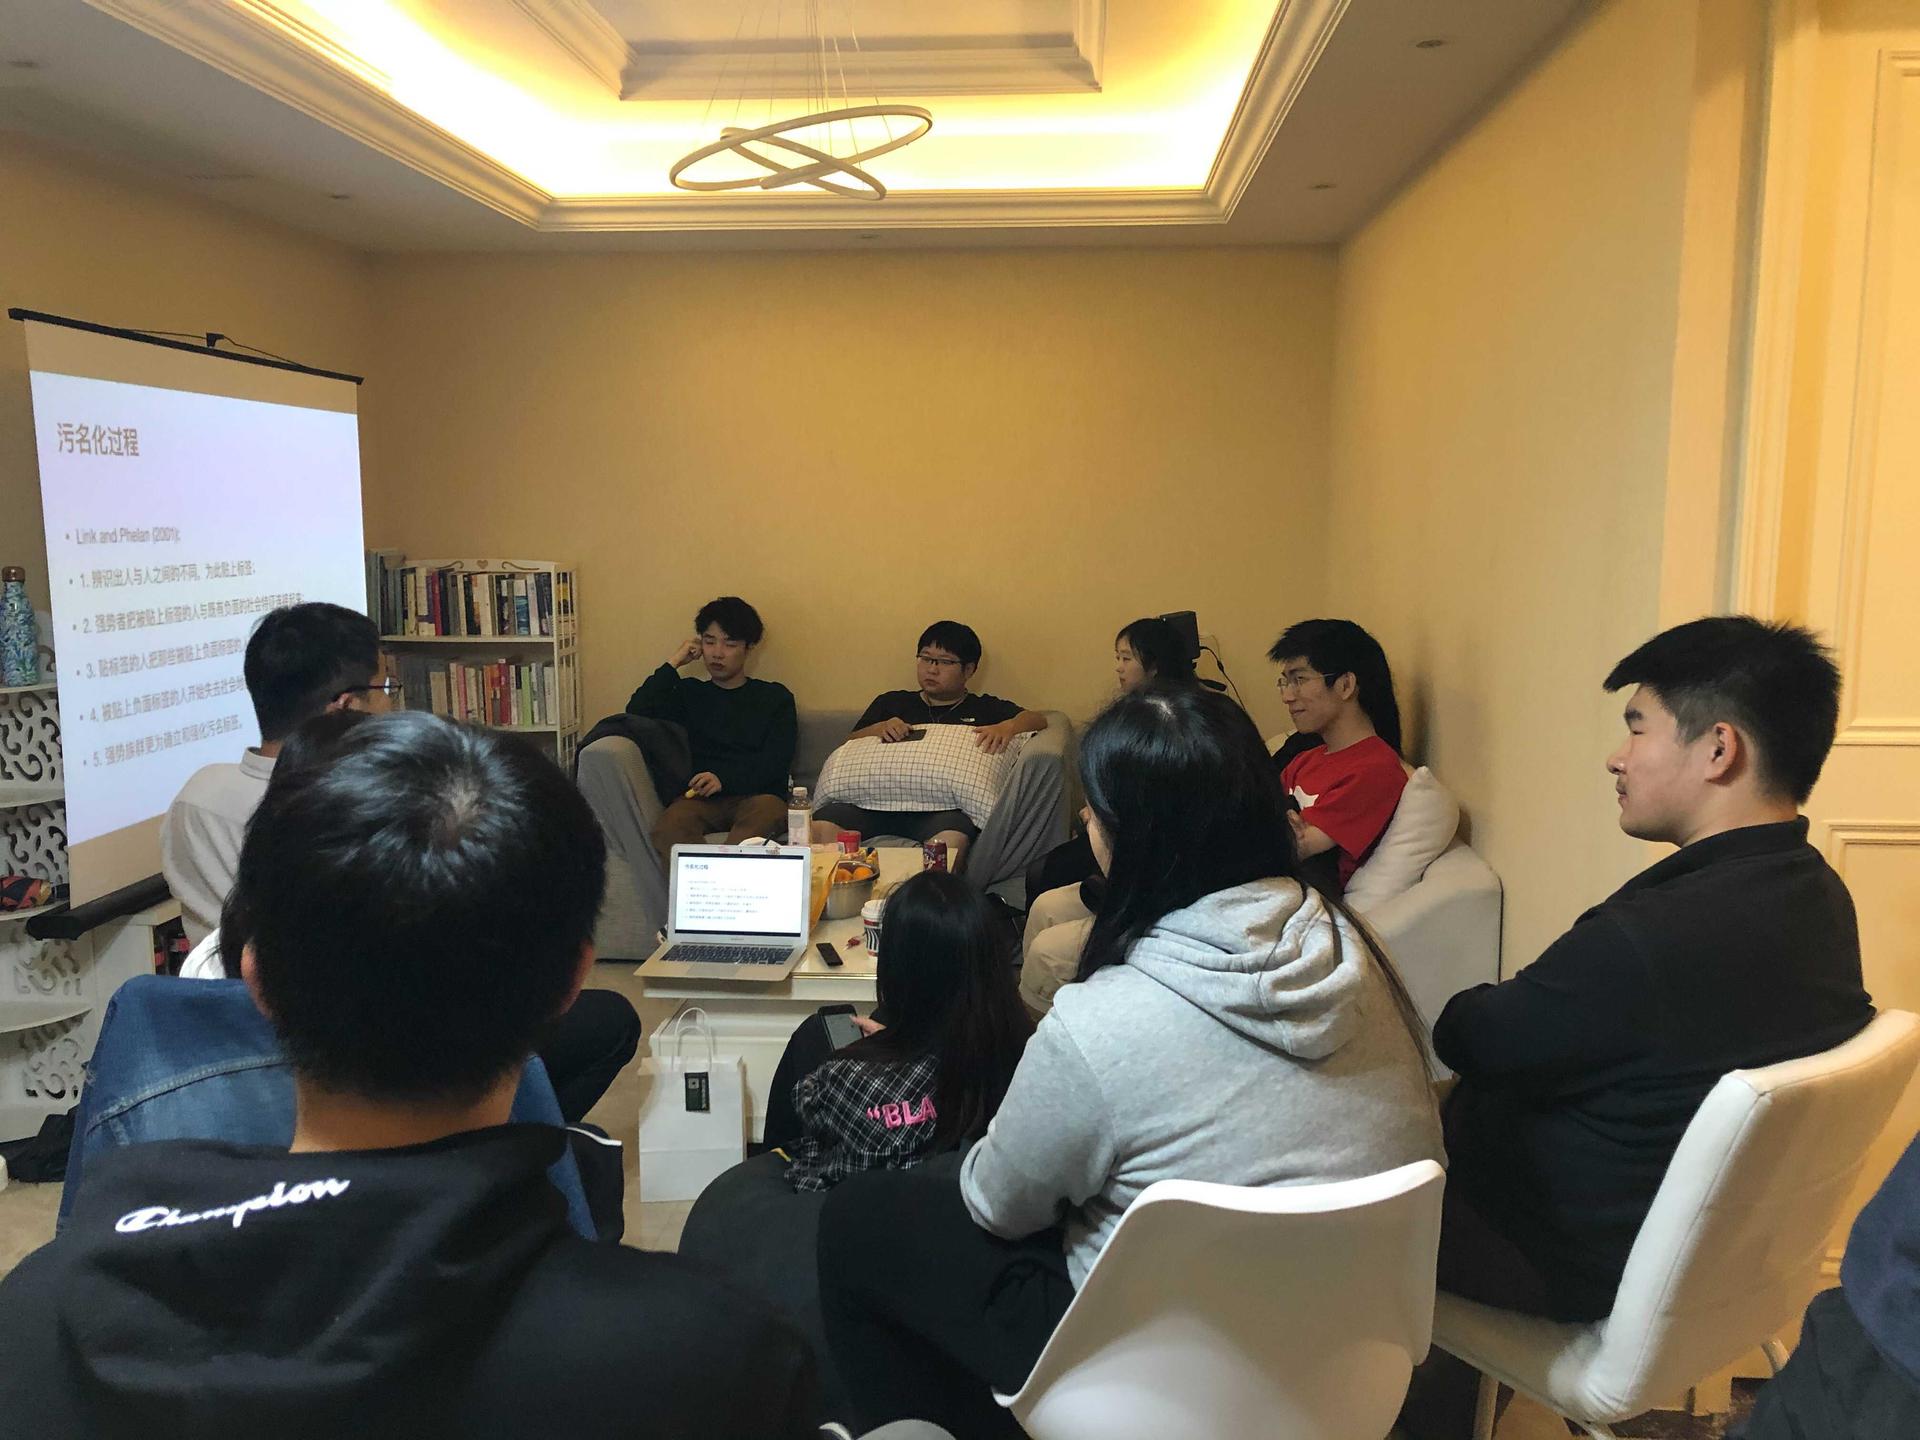 Students study together at 706 Life Lab, a co-living community in Hangzhou, China, that is attracting Chinese students who seek a community as they study remotely.